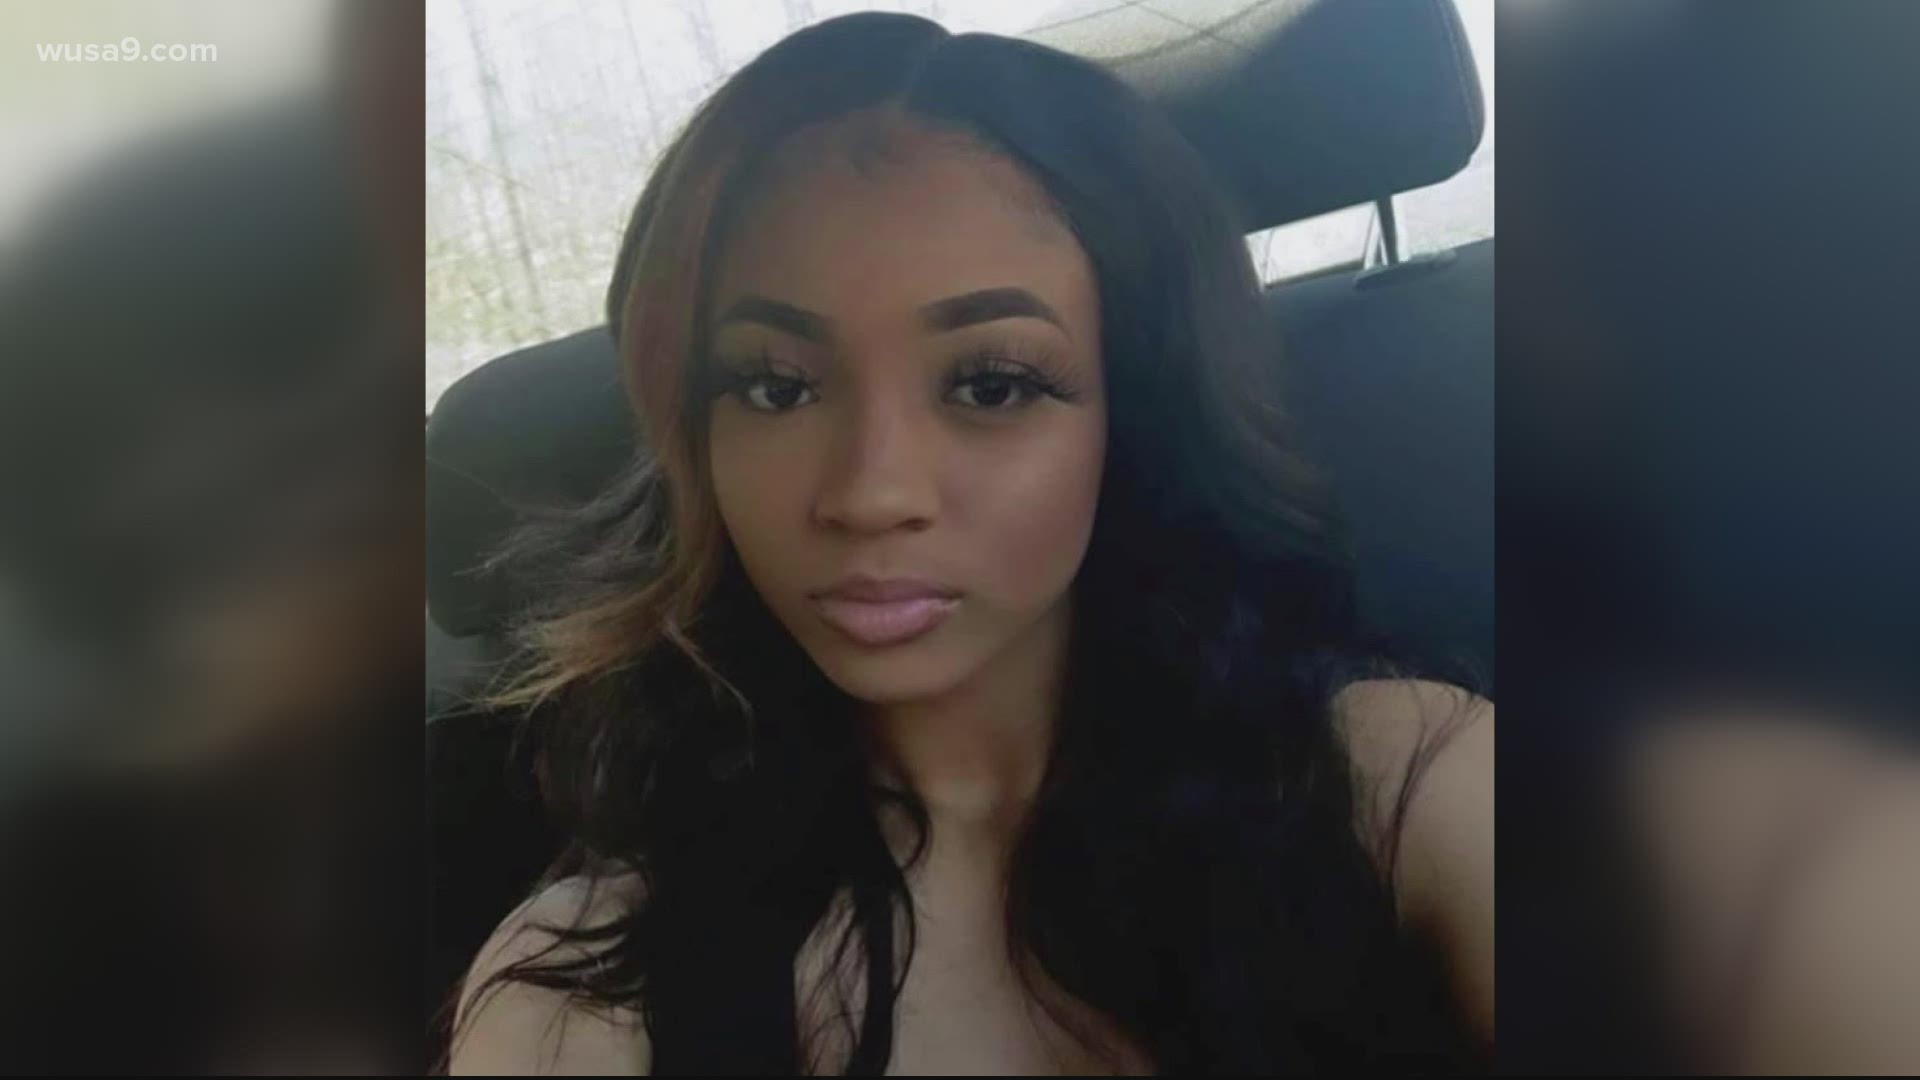 Police have identified the woman as Cierra Young of District Heights, Maryland. Young was shot when she was in the car, according to police.